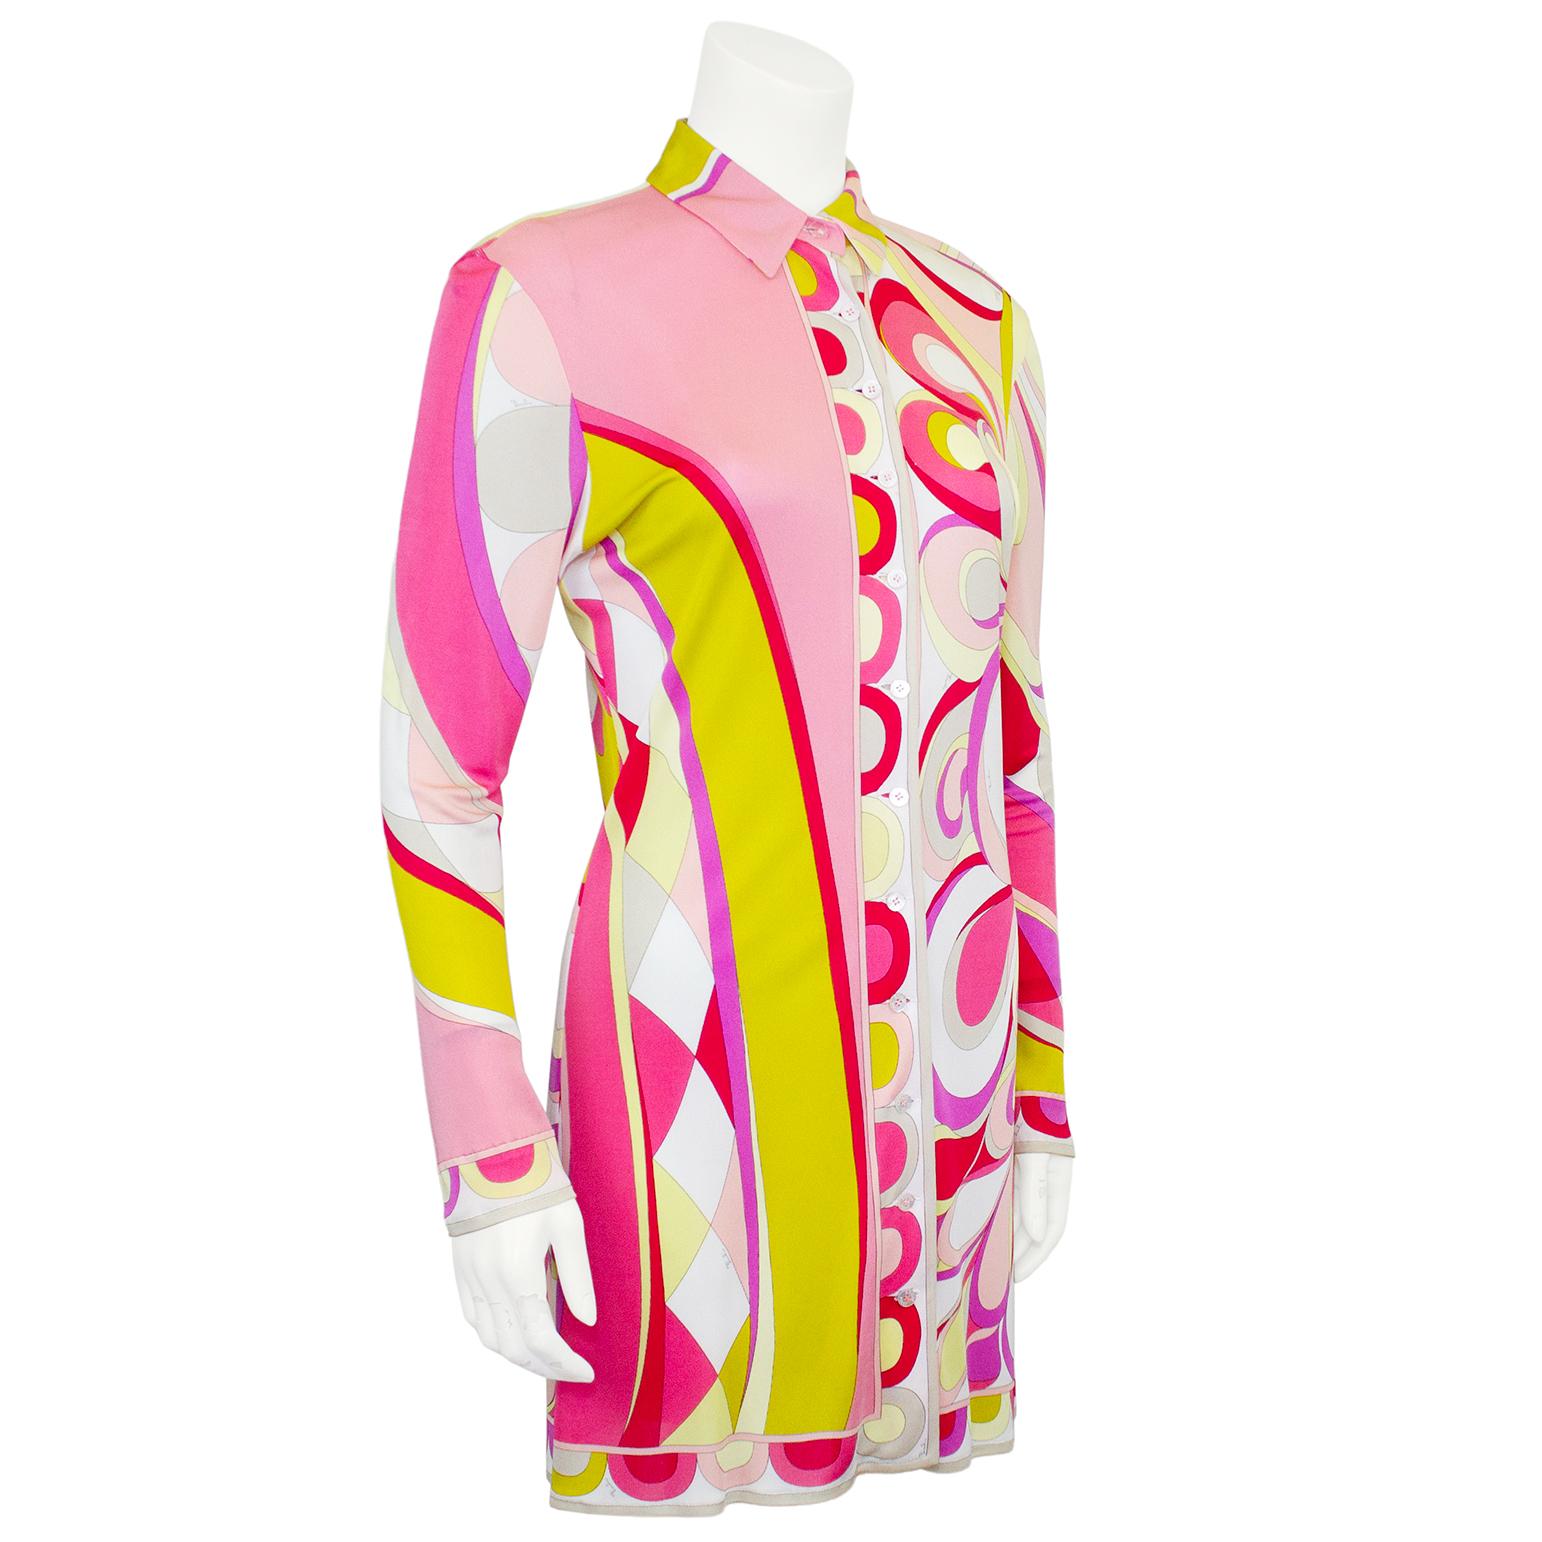 Great Emilio Pucci tunic from the 1990s. Abstract printed sheer lycra with shades of pink, red, yellow and purple. The colour combination with the 1960s inspired print is very fun, bright and happy. Can be worn with jeans or as a bathing suit cover